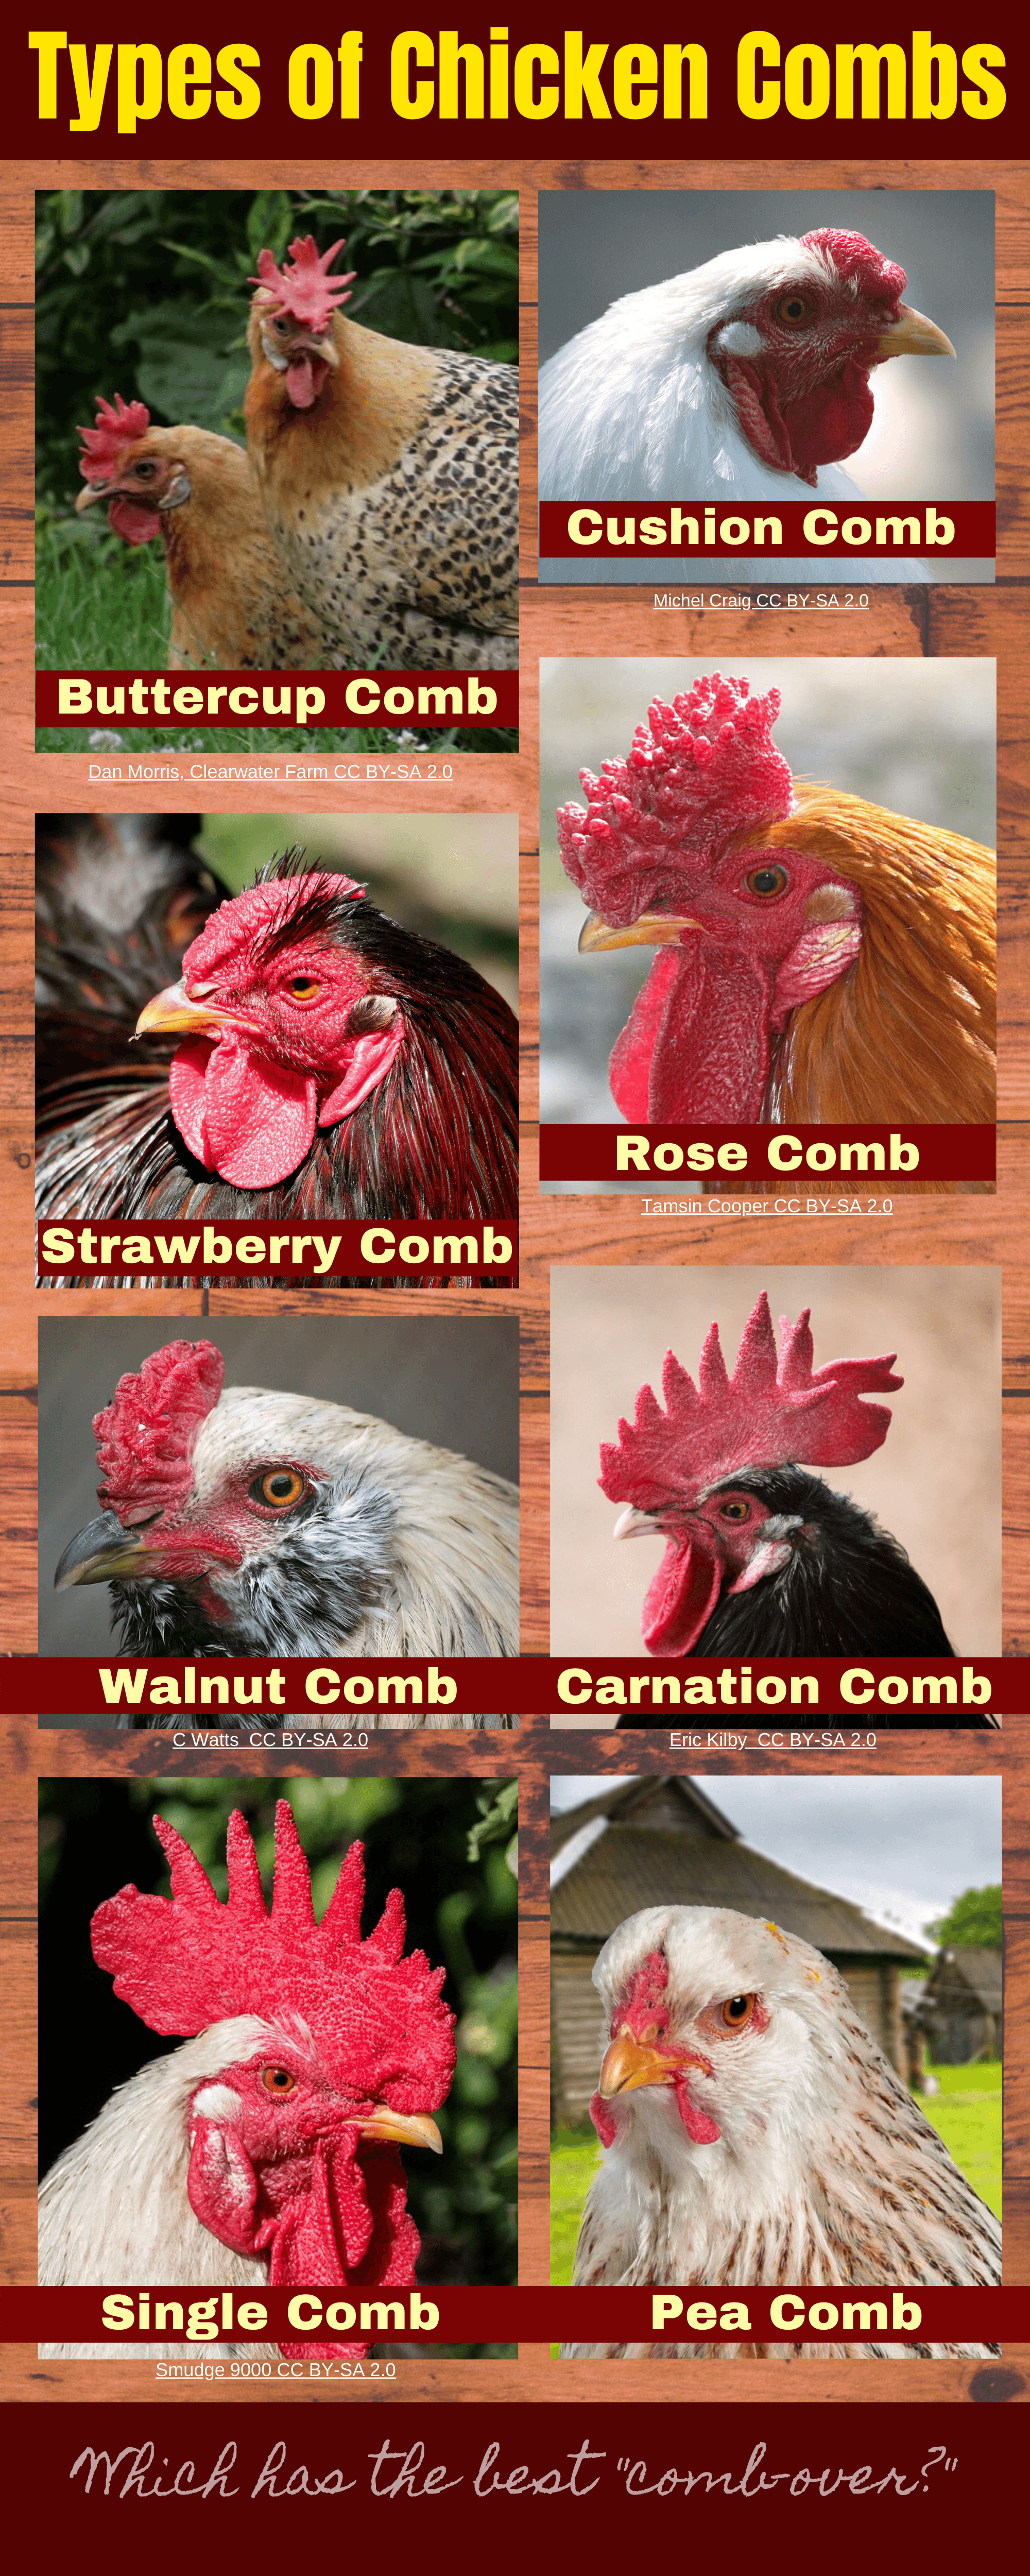 Different Kinds Of Chicken Combs